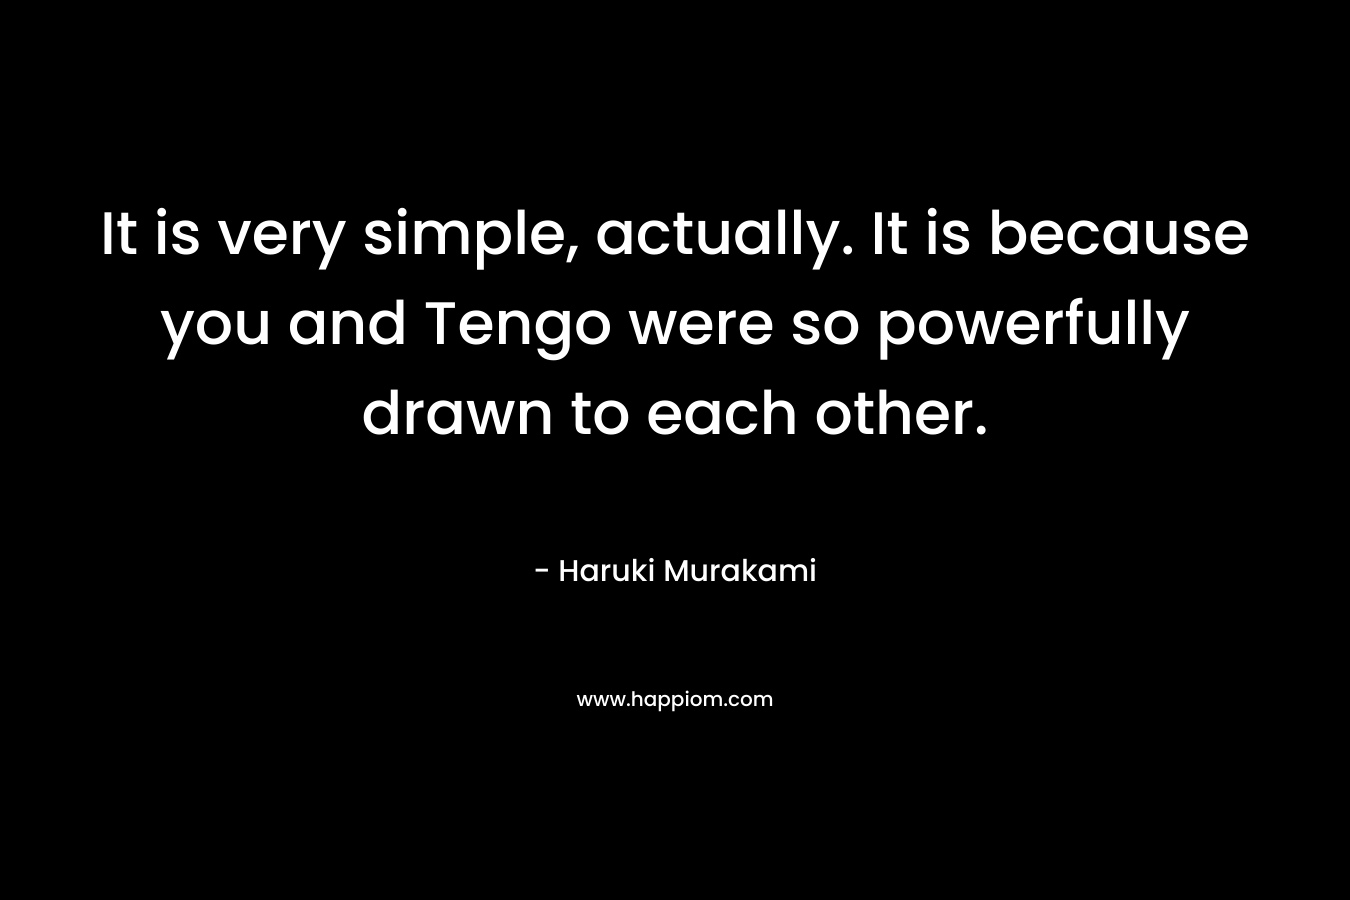 It is very simple, actually. It is because you and Tengo were so powerfully drawn to each other. – Haruki Murakami